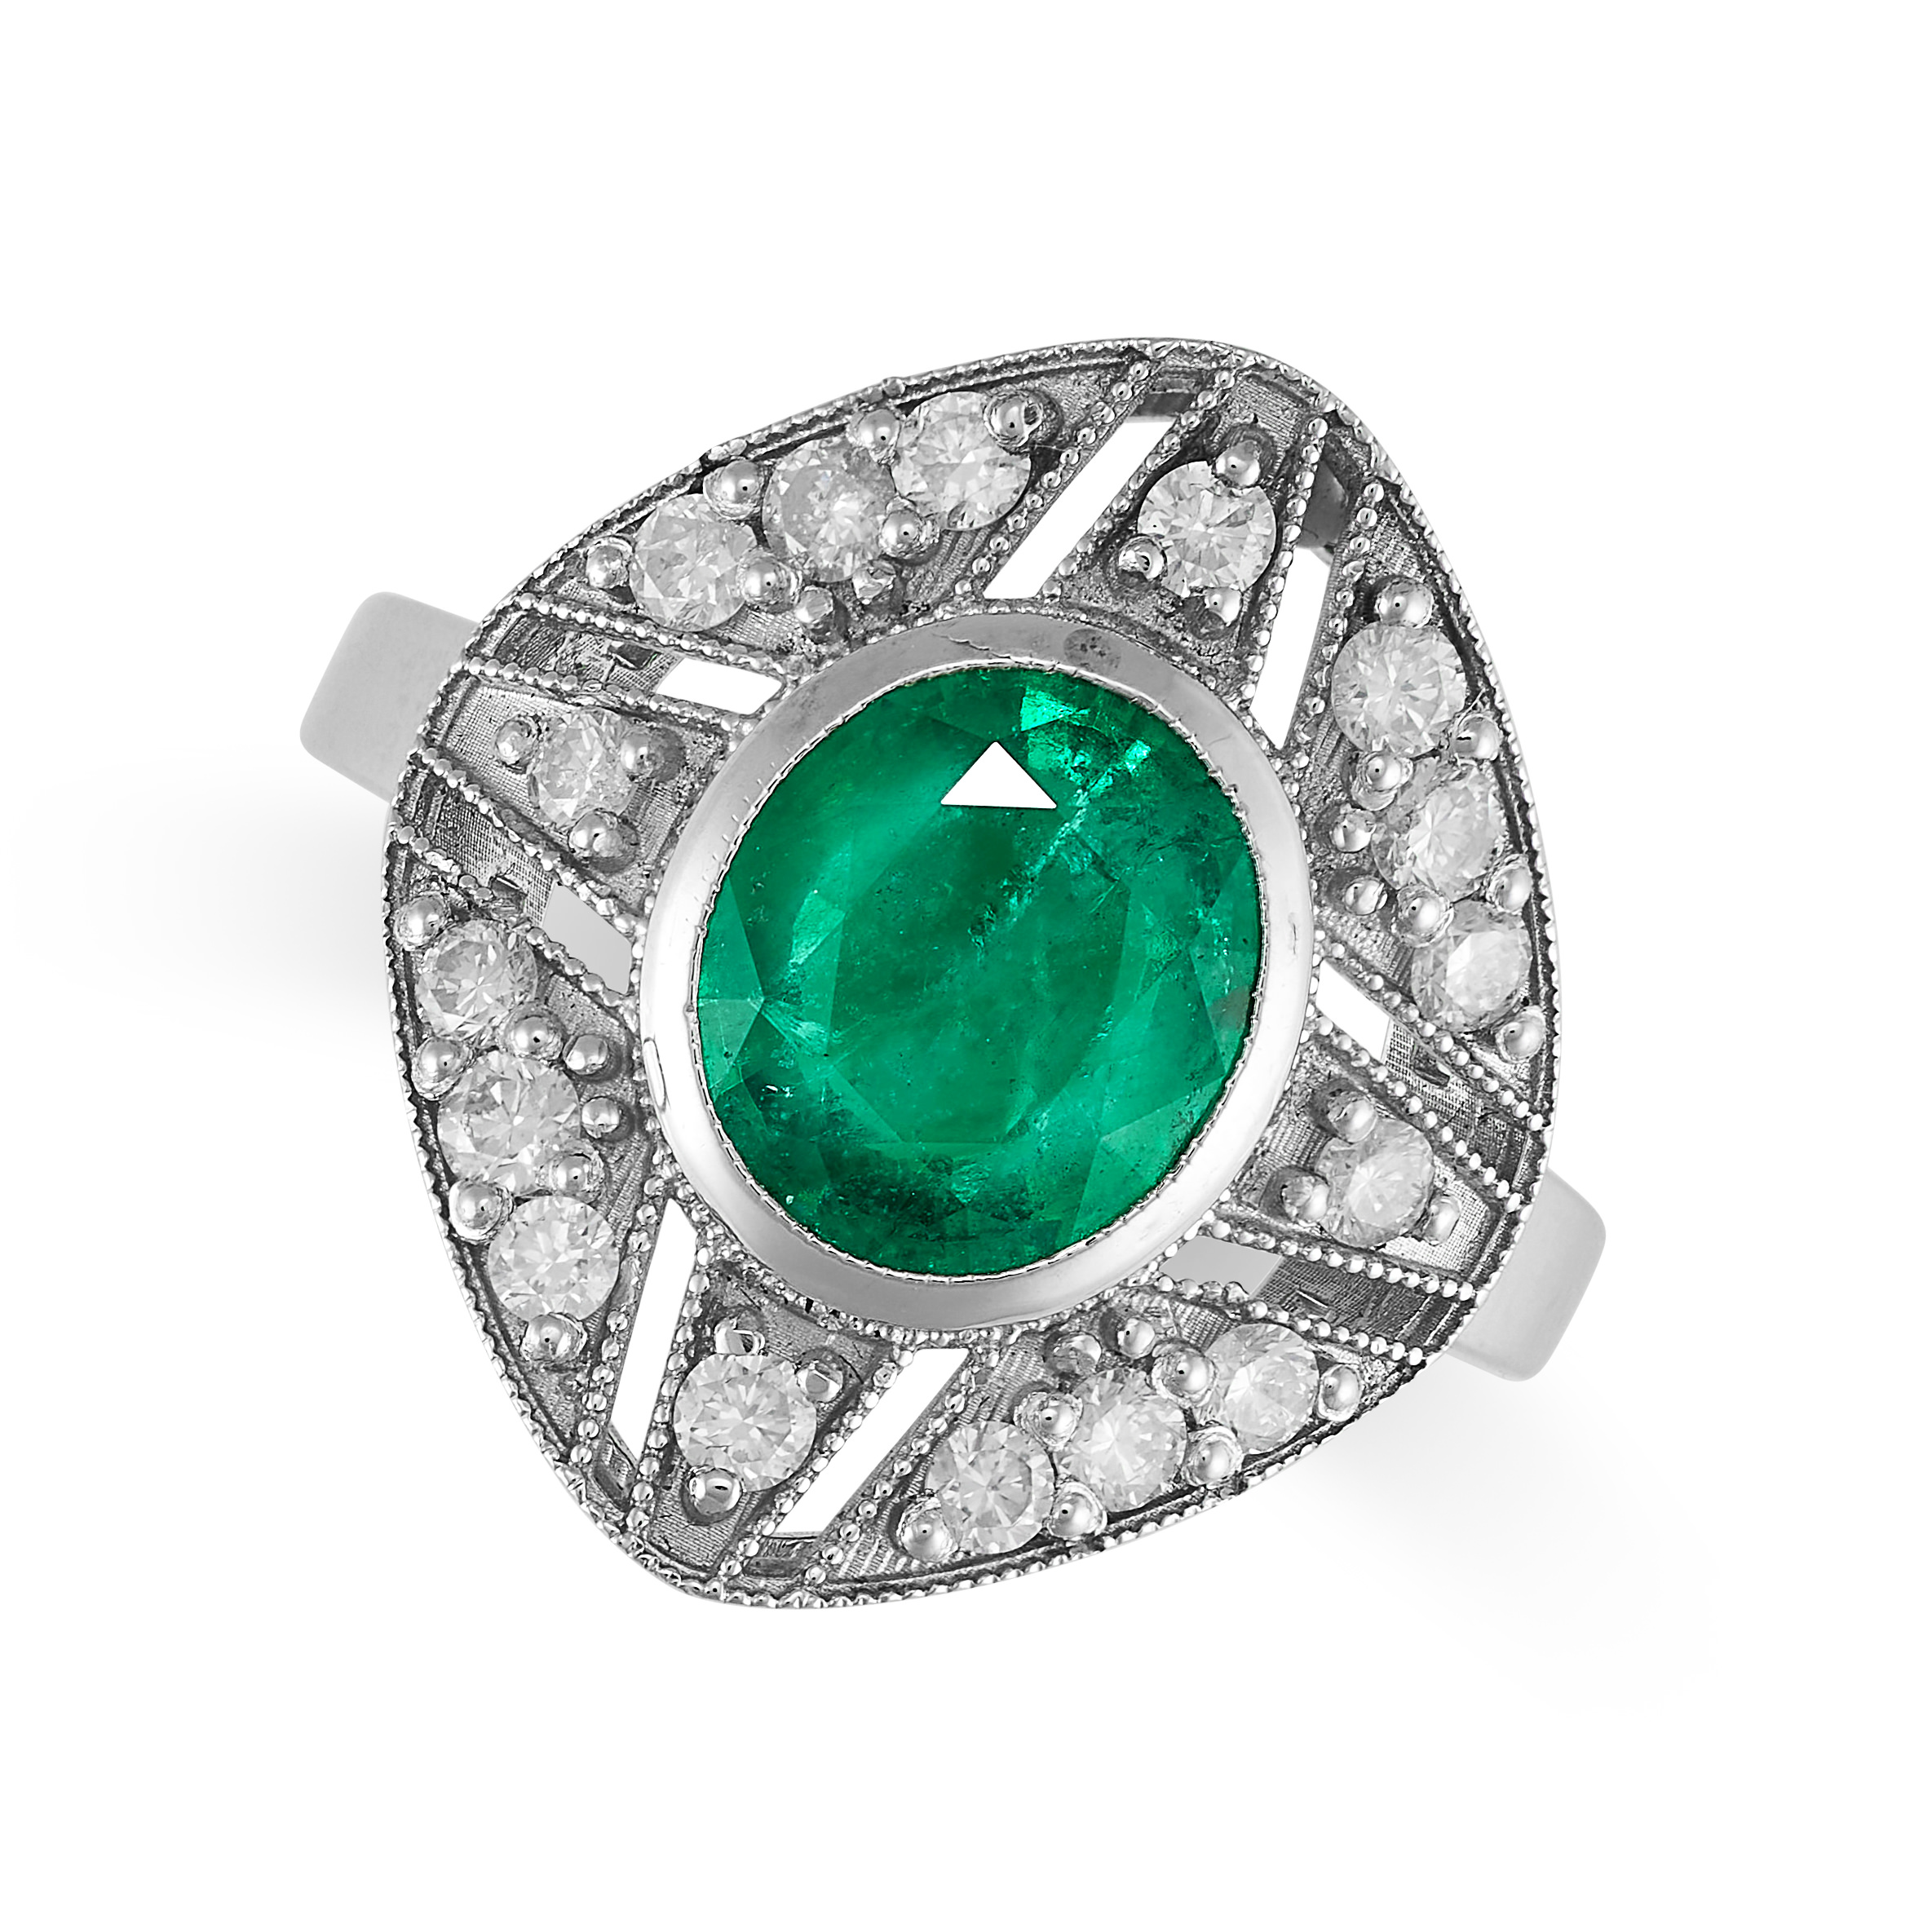 AN EMERALD AND DIAMOND DRESS RING set with an oval cut emerald of approximately 1.85 carats in an